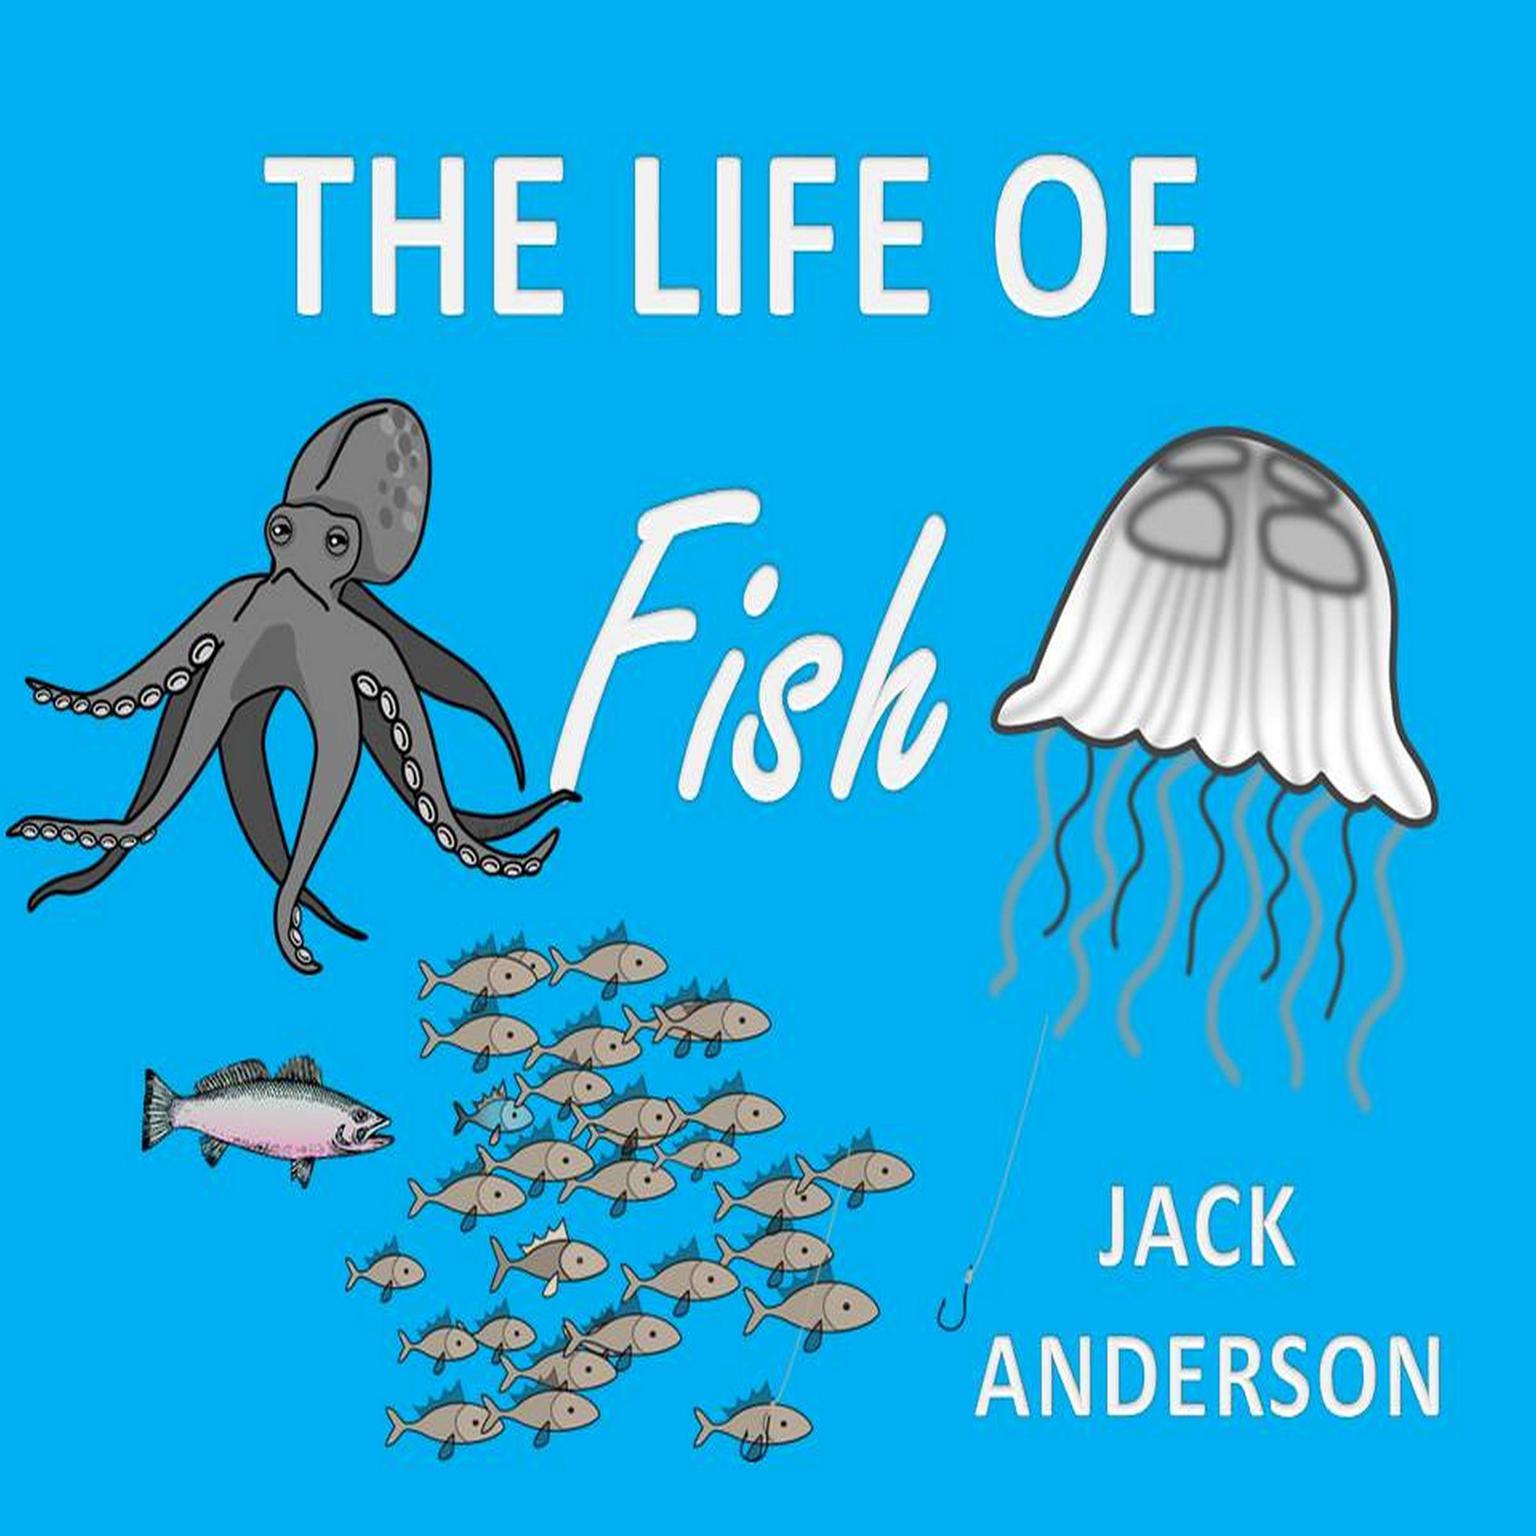 The Life of Fish Audiobook, by Jack Anderson  